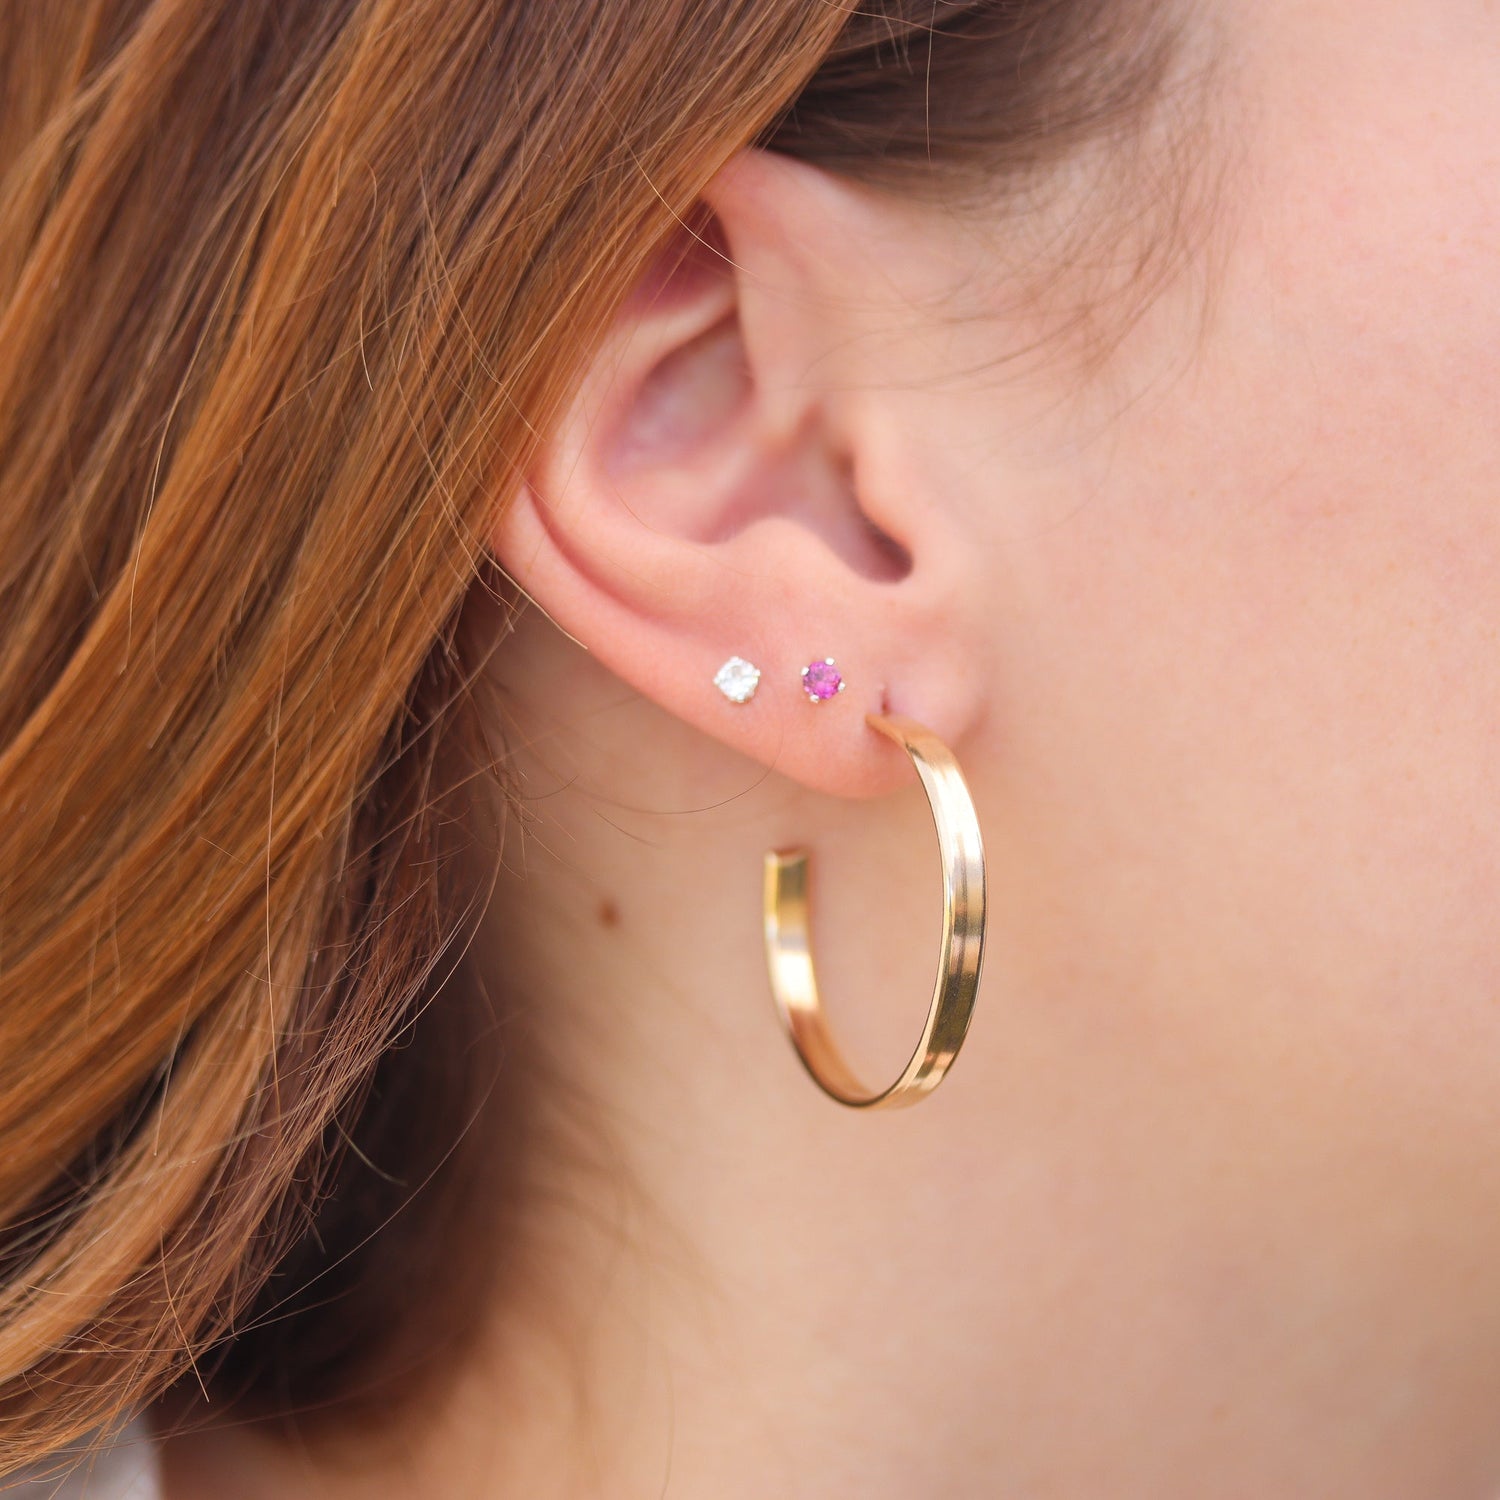 Wide Gold Hoops, 1.25 Inches